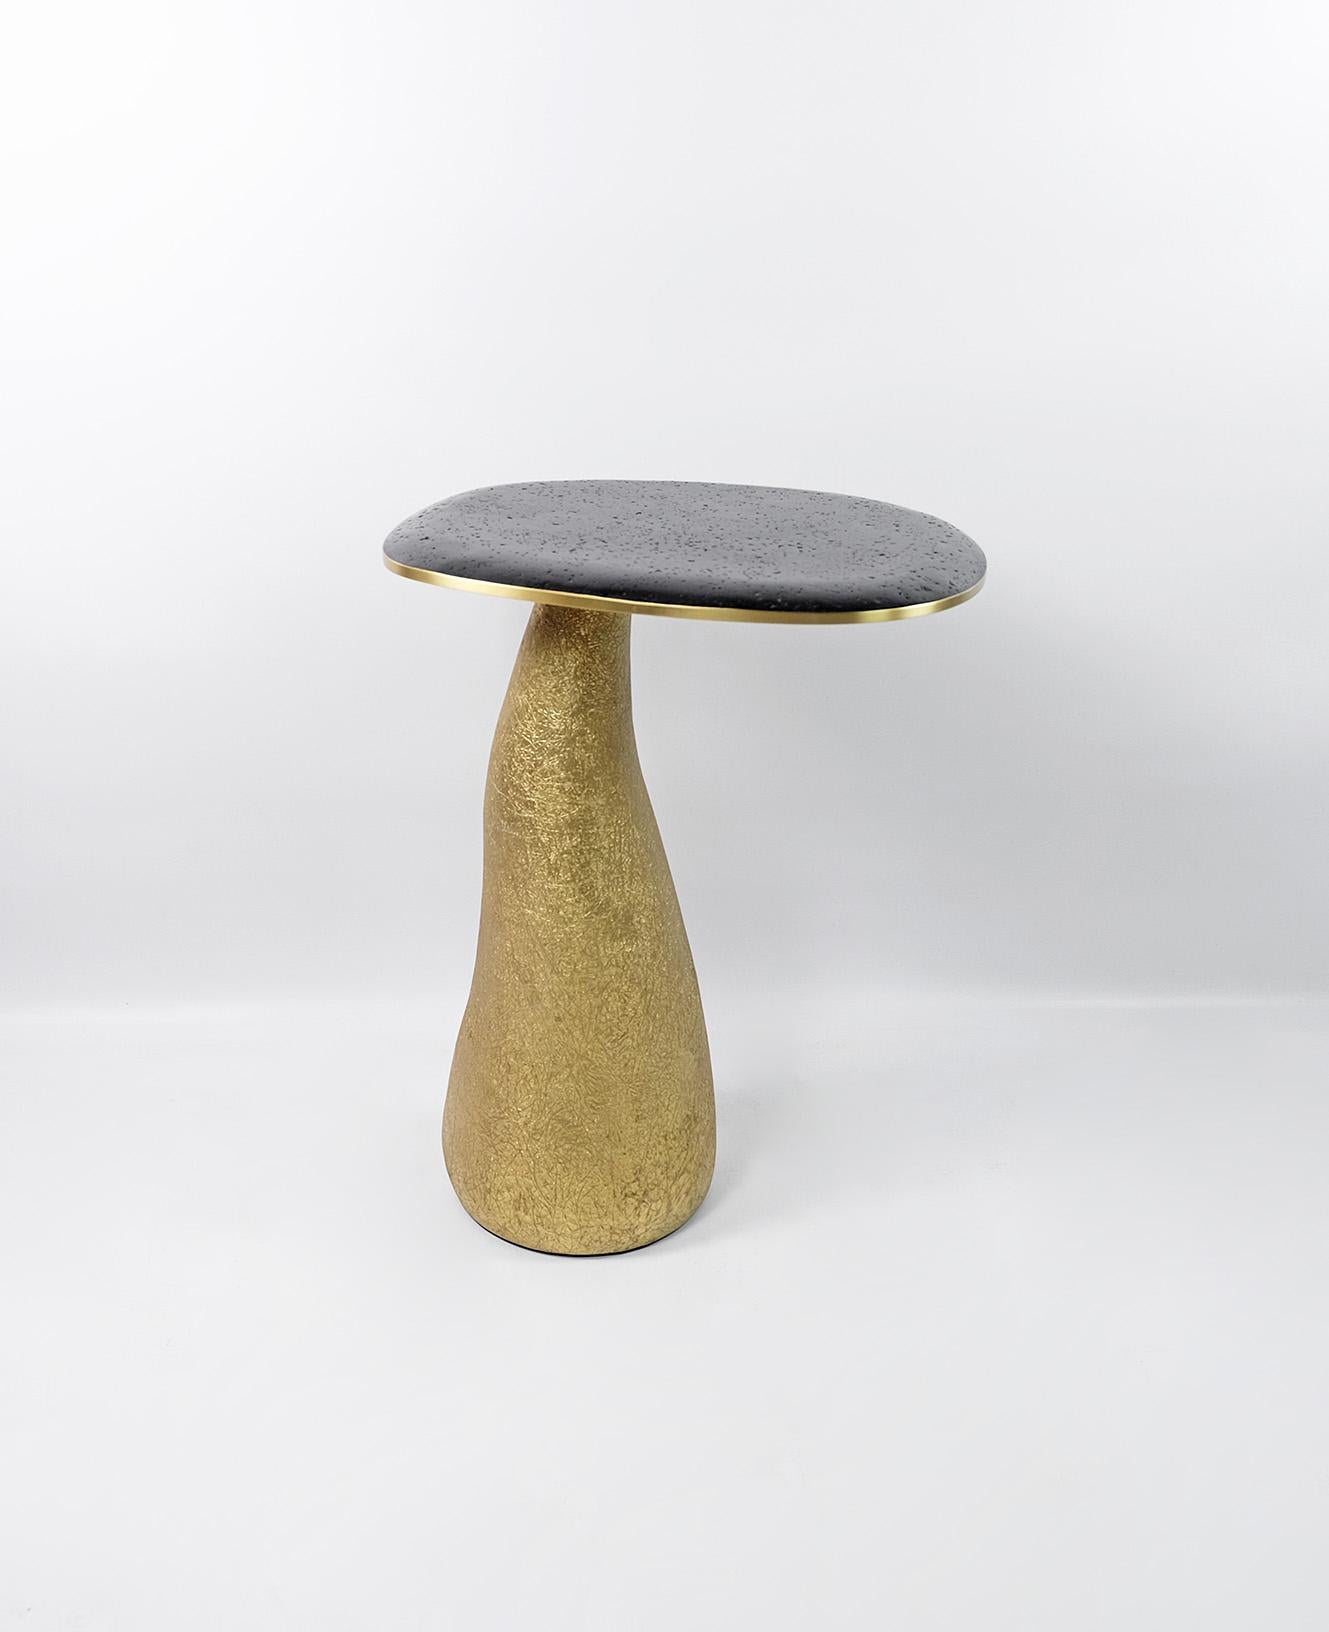 This set of 2 tables is made of lava stone marquetry top with brass trims.
The base is made of wood with a gilded semi-raw glass fiber inlaying.
The semi raw finishing brings an interesting texture thanks to the nice organic shape of the